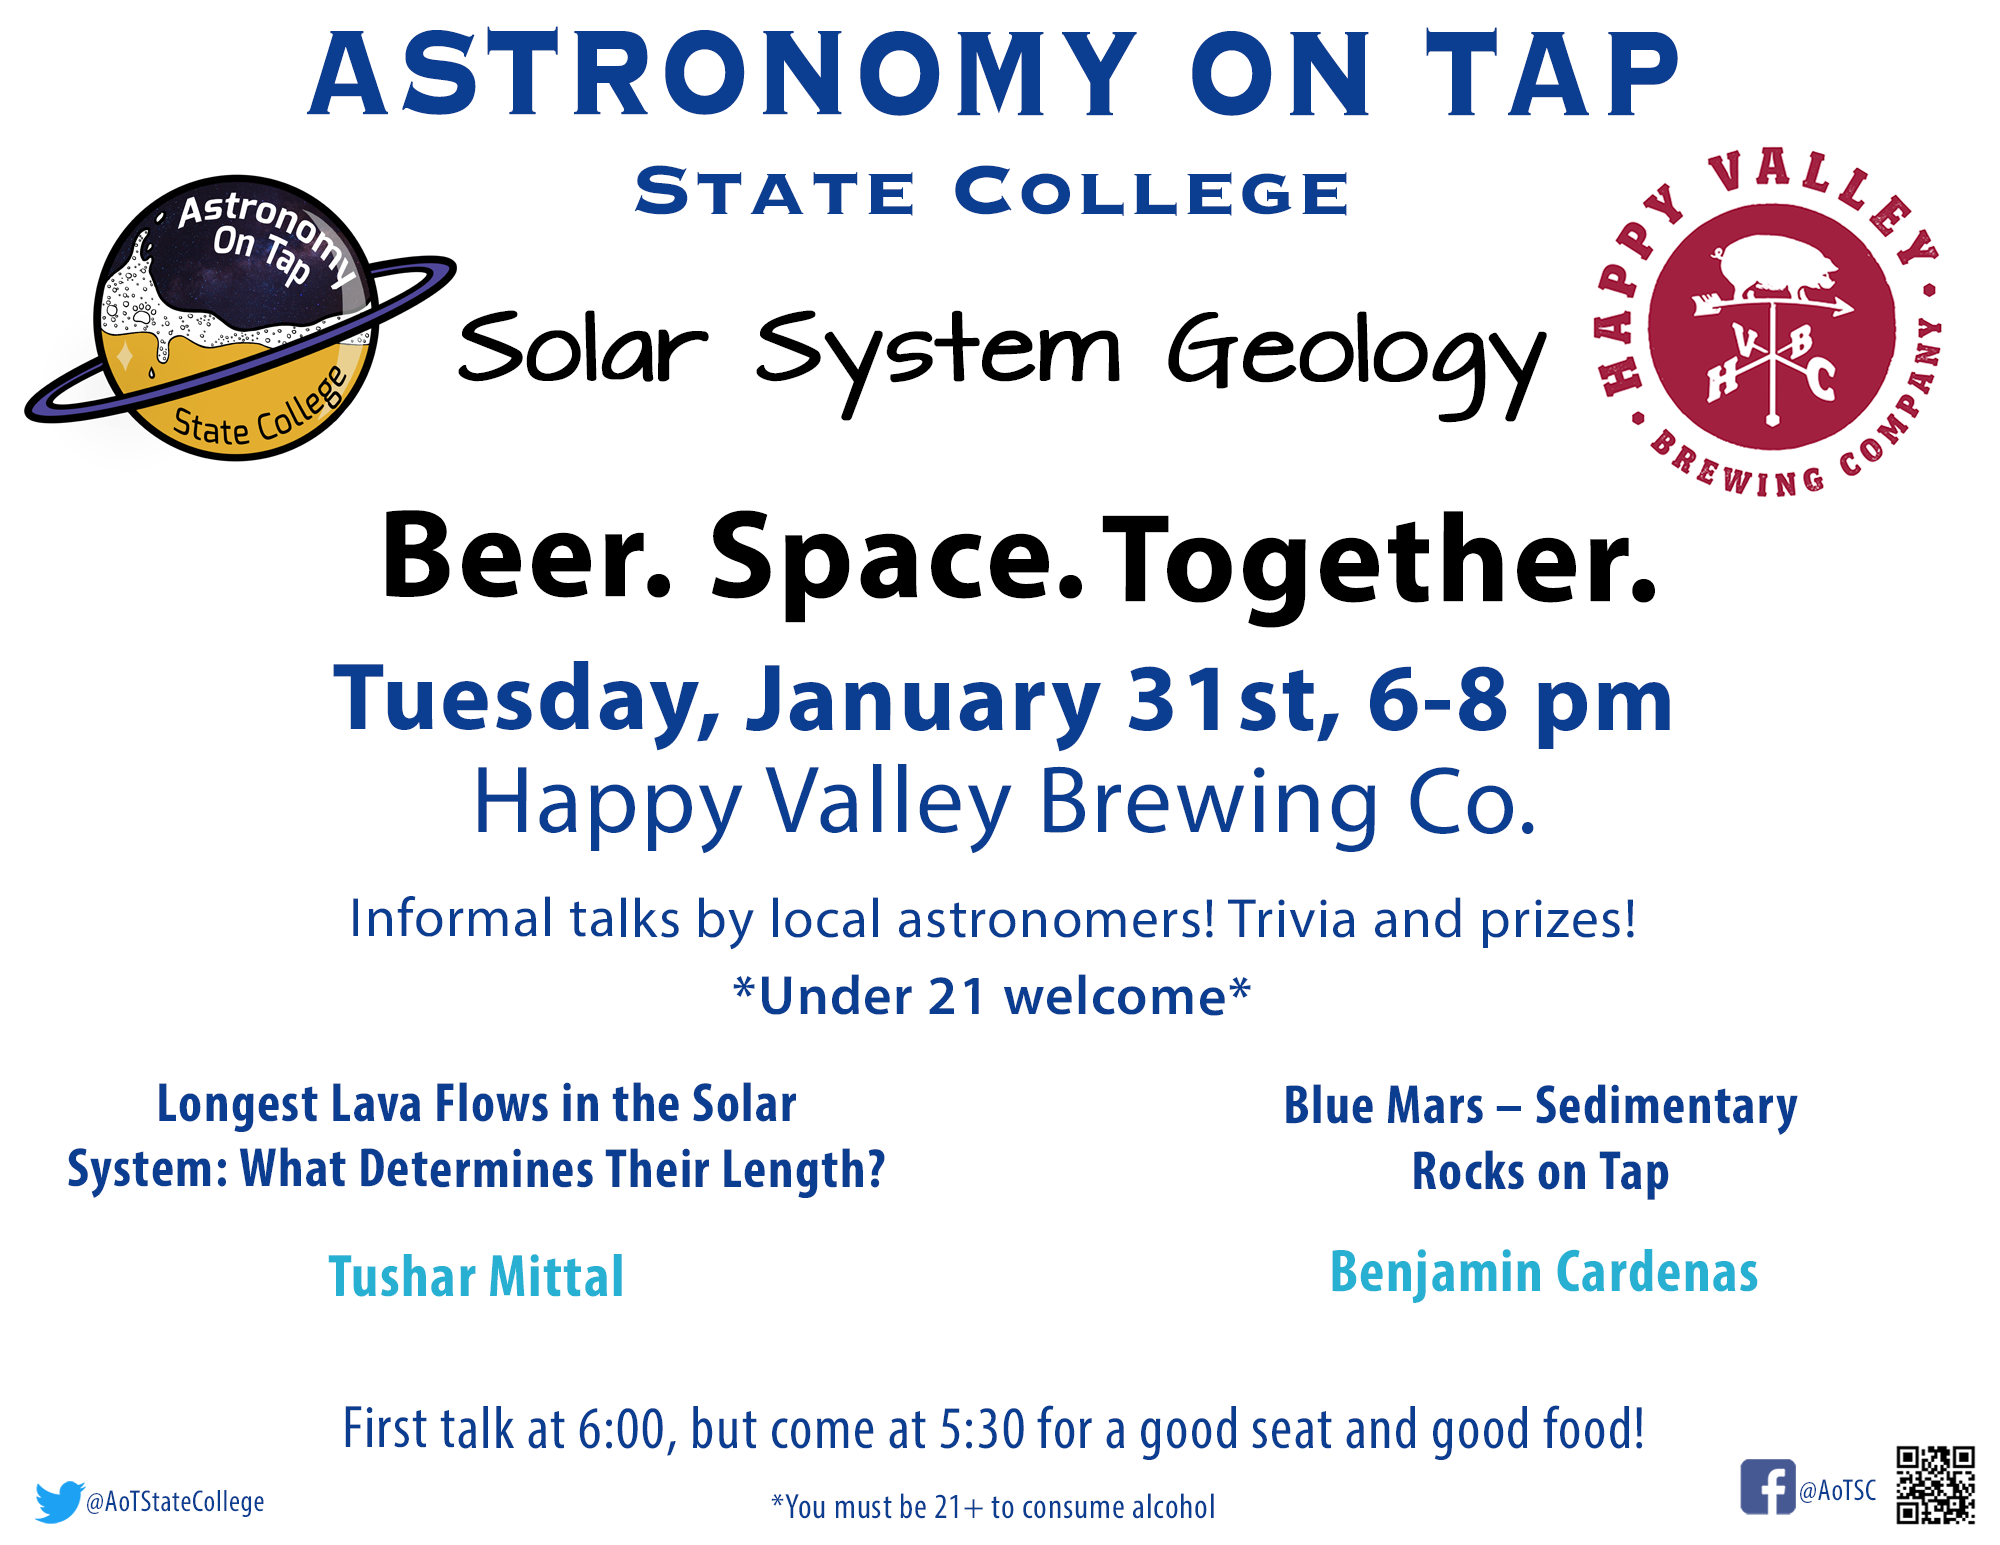 Astronomy on Tap State College on January 31 from 6-8 pm at Happy Valley Brewing Company. Theme: Solar System Geology